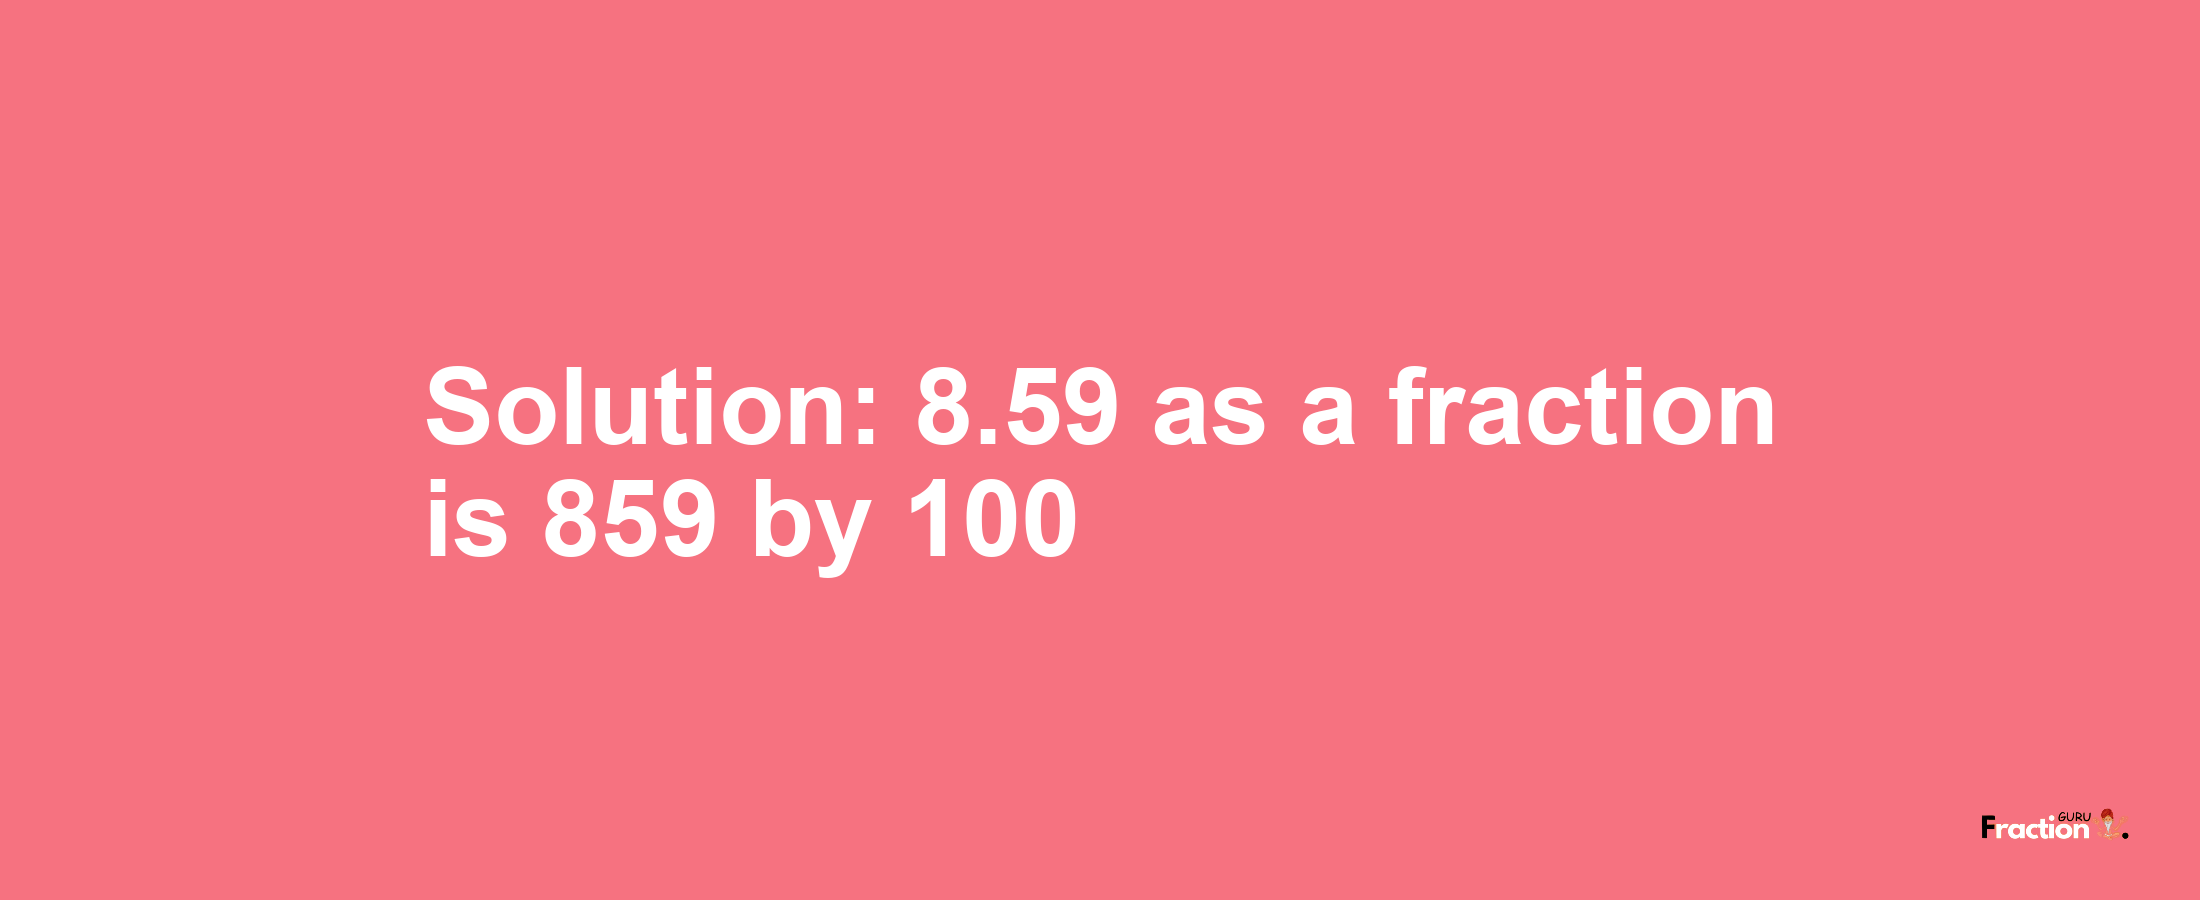 Solution:8.59 as a fraction is 859/100